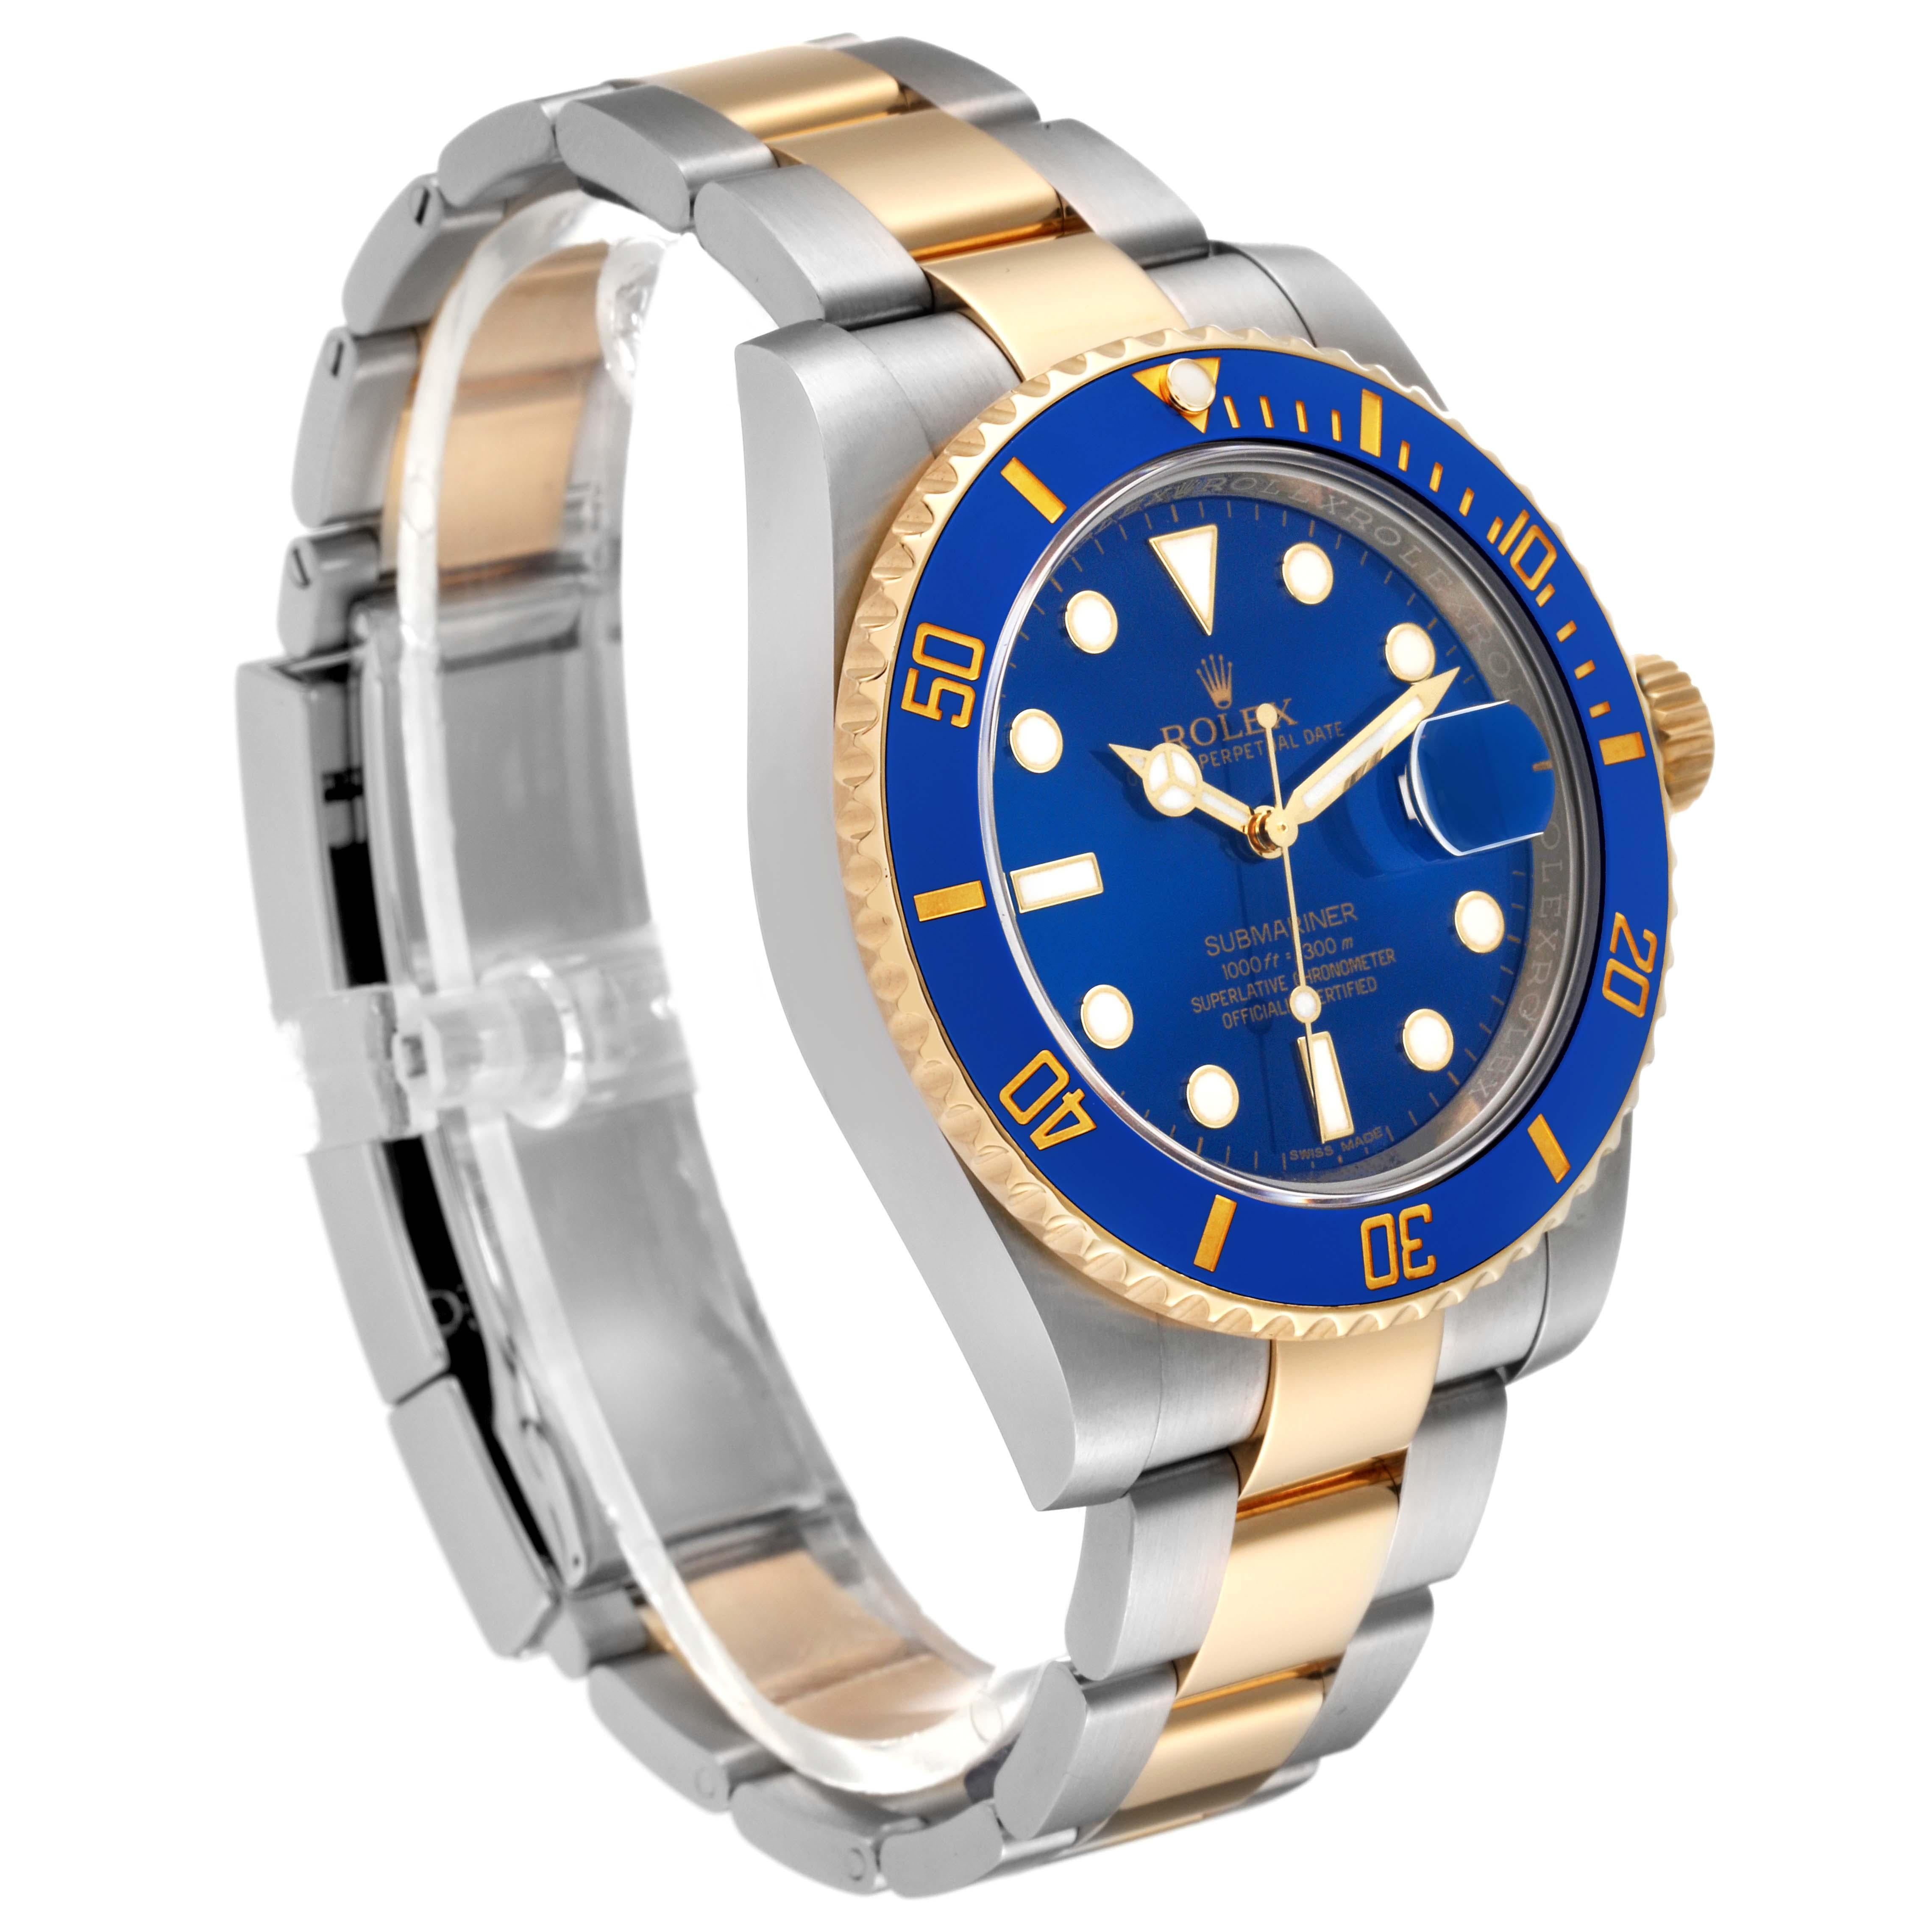 Rolex Submariner Steel Yellow Gold Blue Dial Mens Watch 116613 Box Card 3